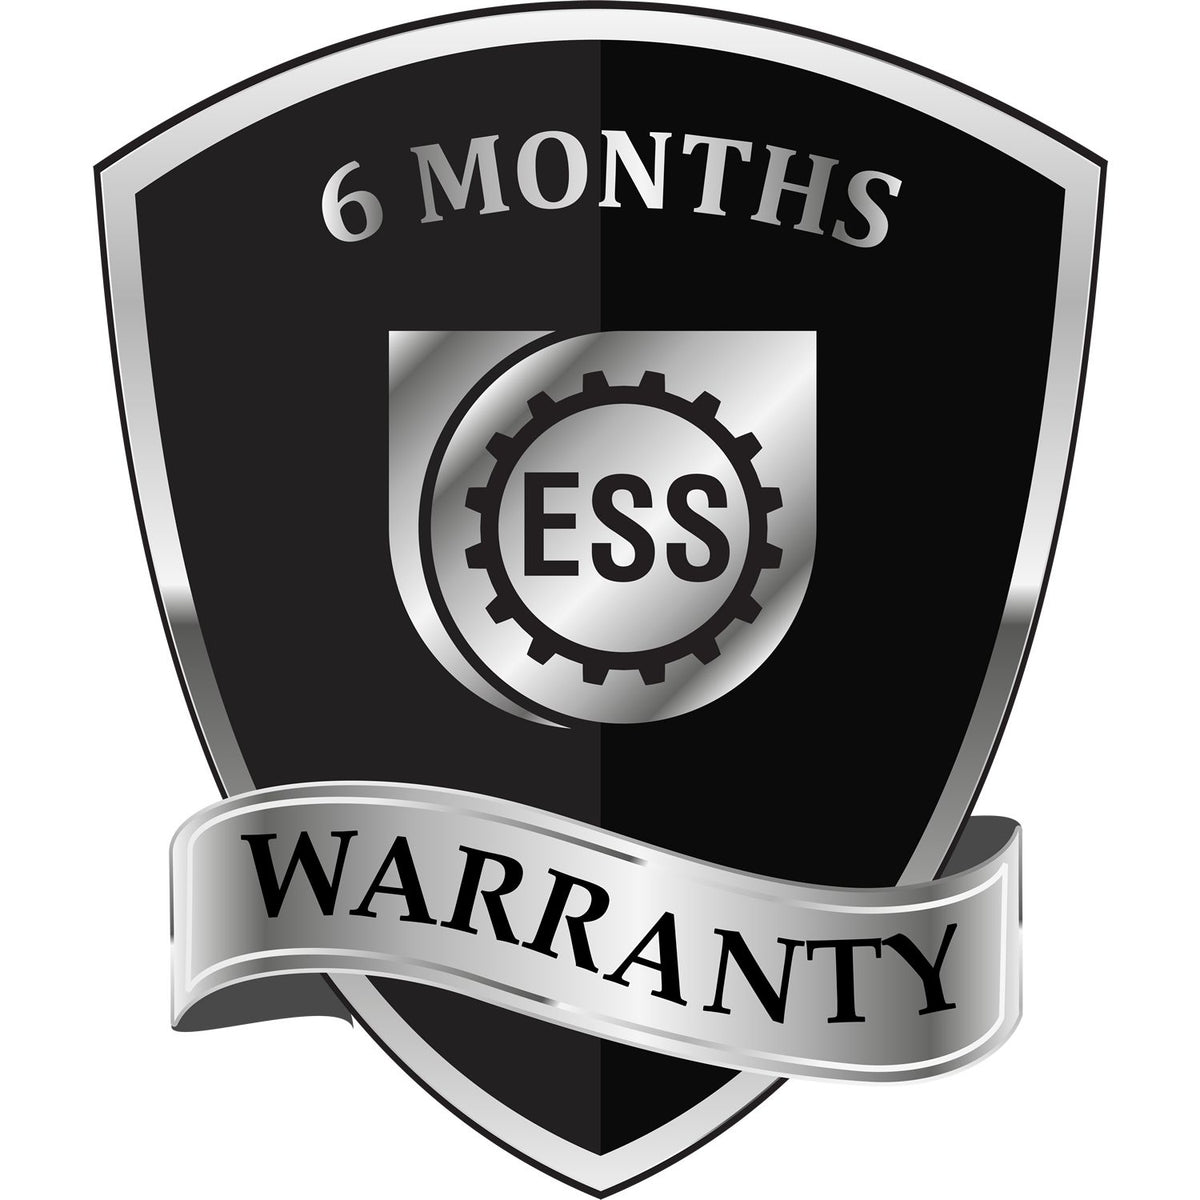 Narrow Copy for your Information Rubber Stamp 4068R 6 Month Warranty